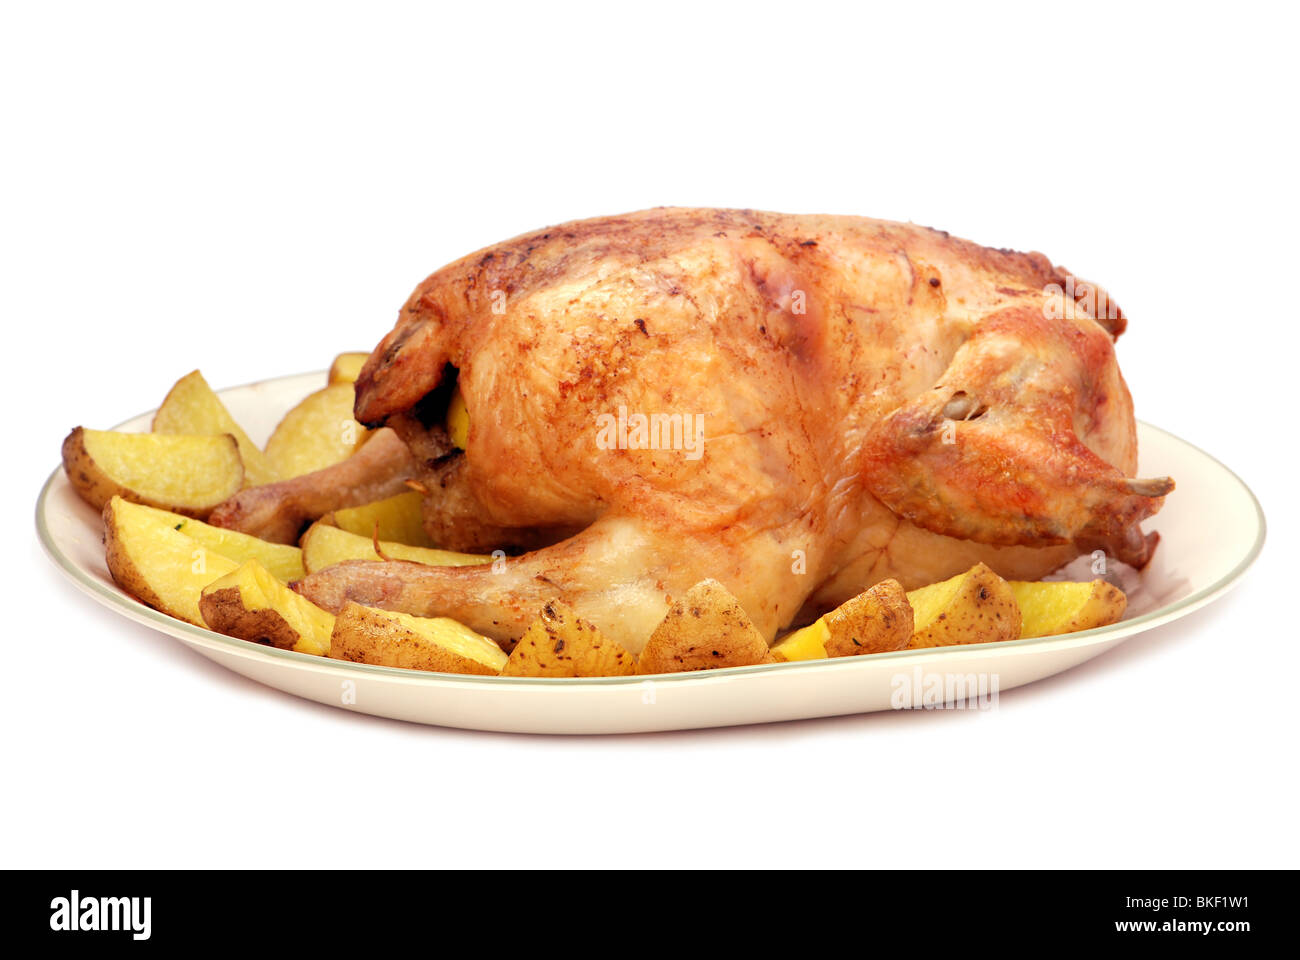 Roasted chicken with potato on a plate isolated Stock Photo